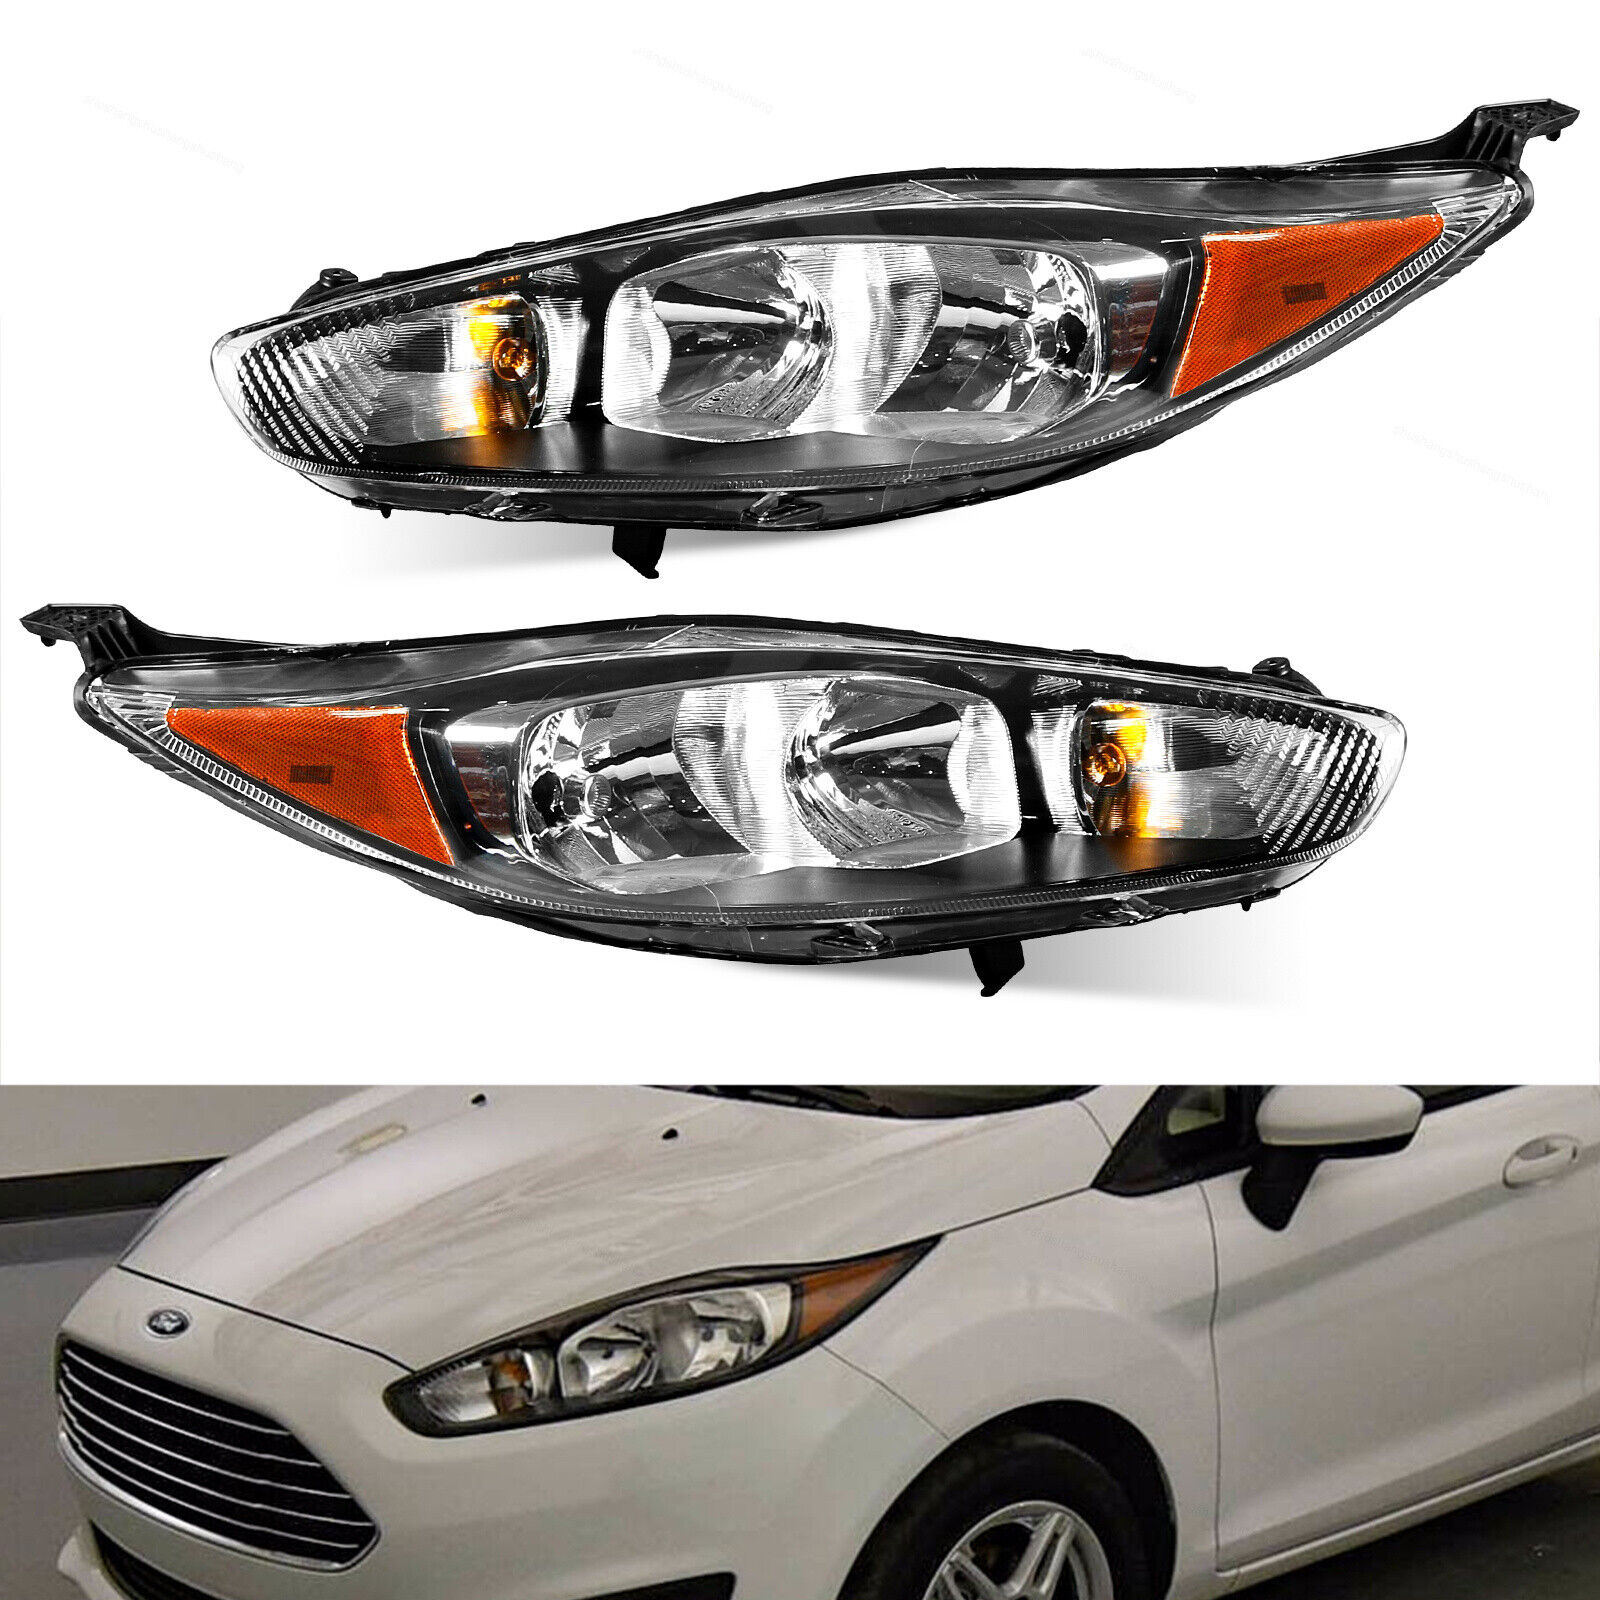 Fit For 2014-2018 Ford Fiesta Black Halogen Headlights Headlamps Left+Right Side